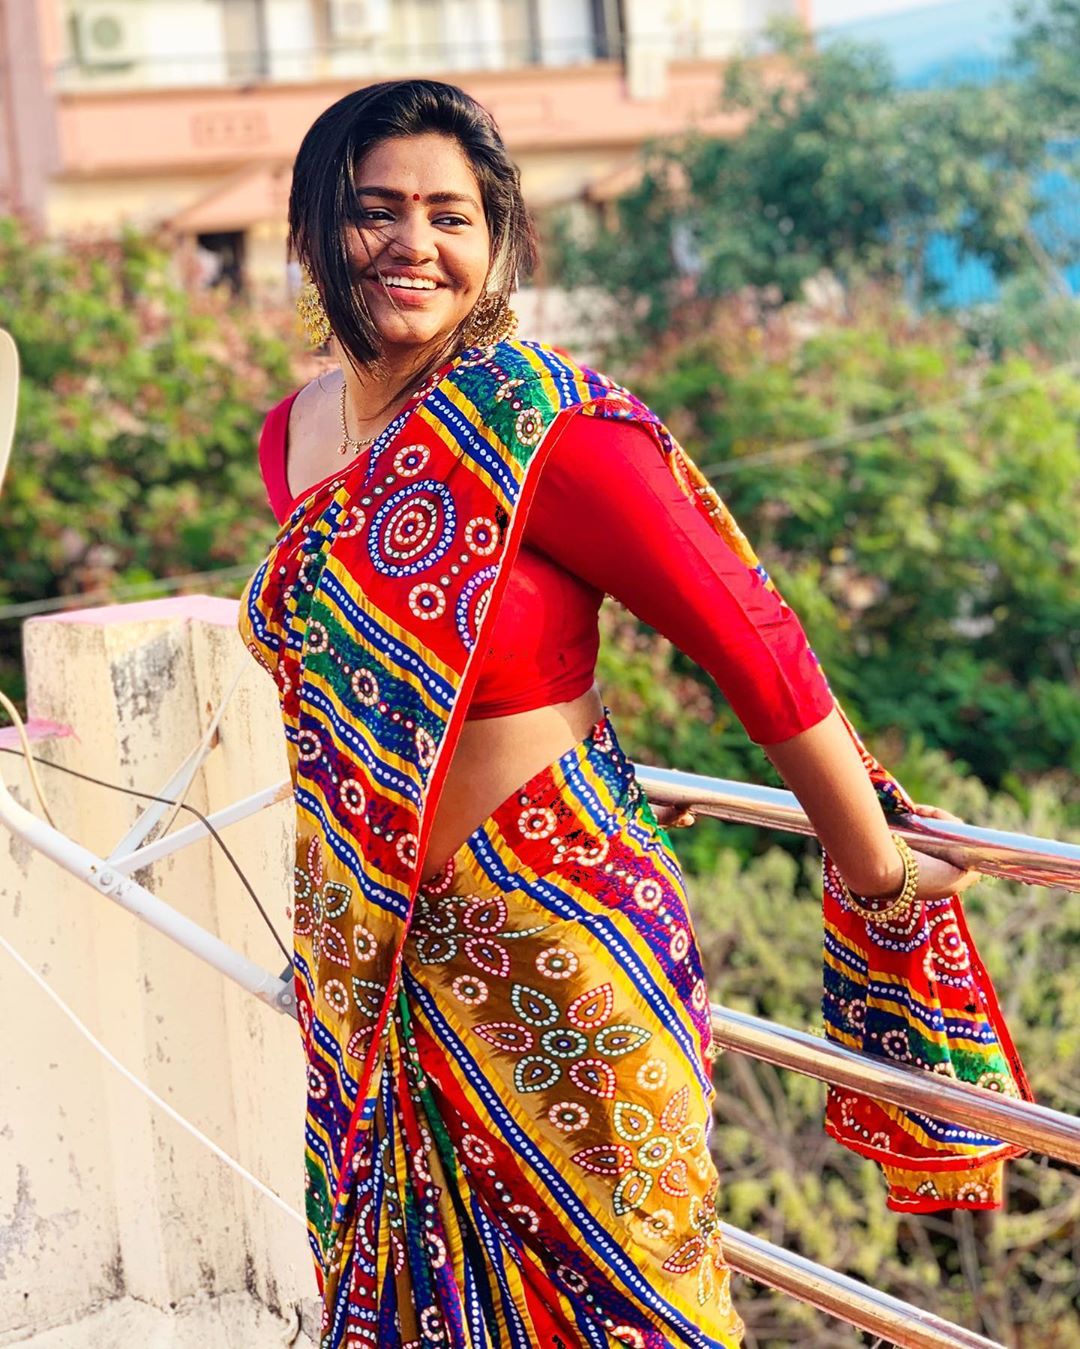 Bigg Boss Tamil 4 latest update, this popular young actress might be a part of this season ft Shalu Shamu